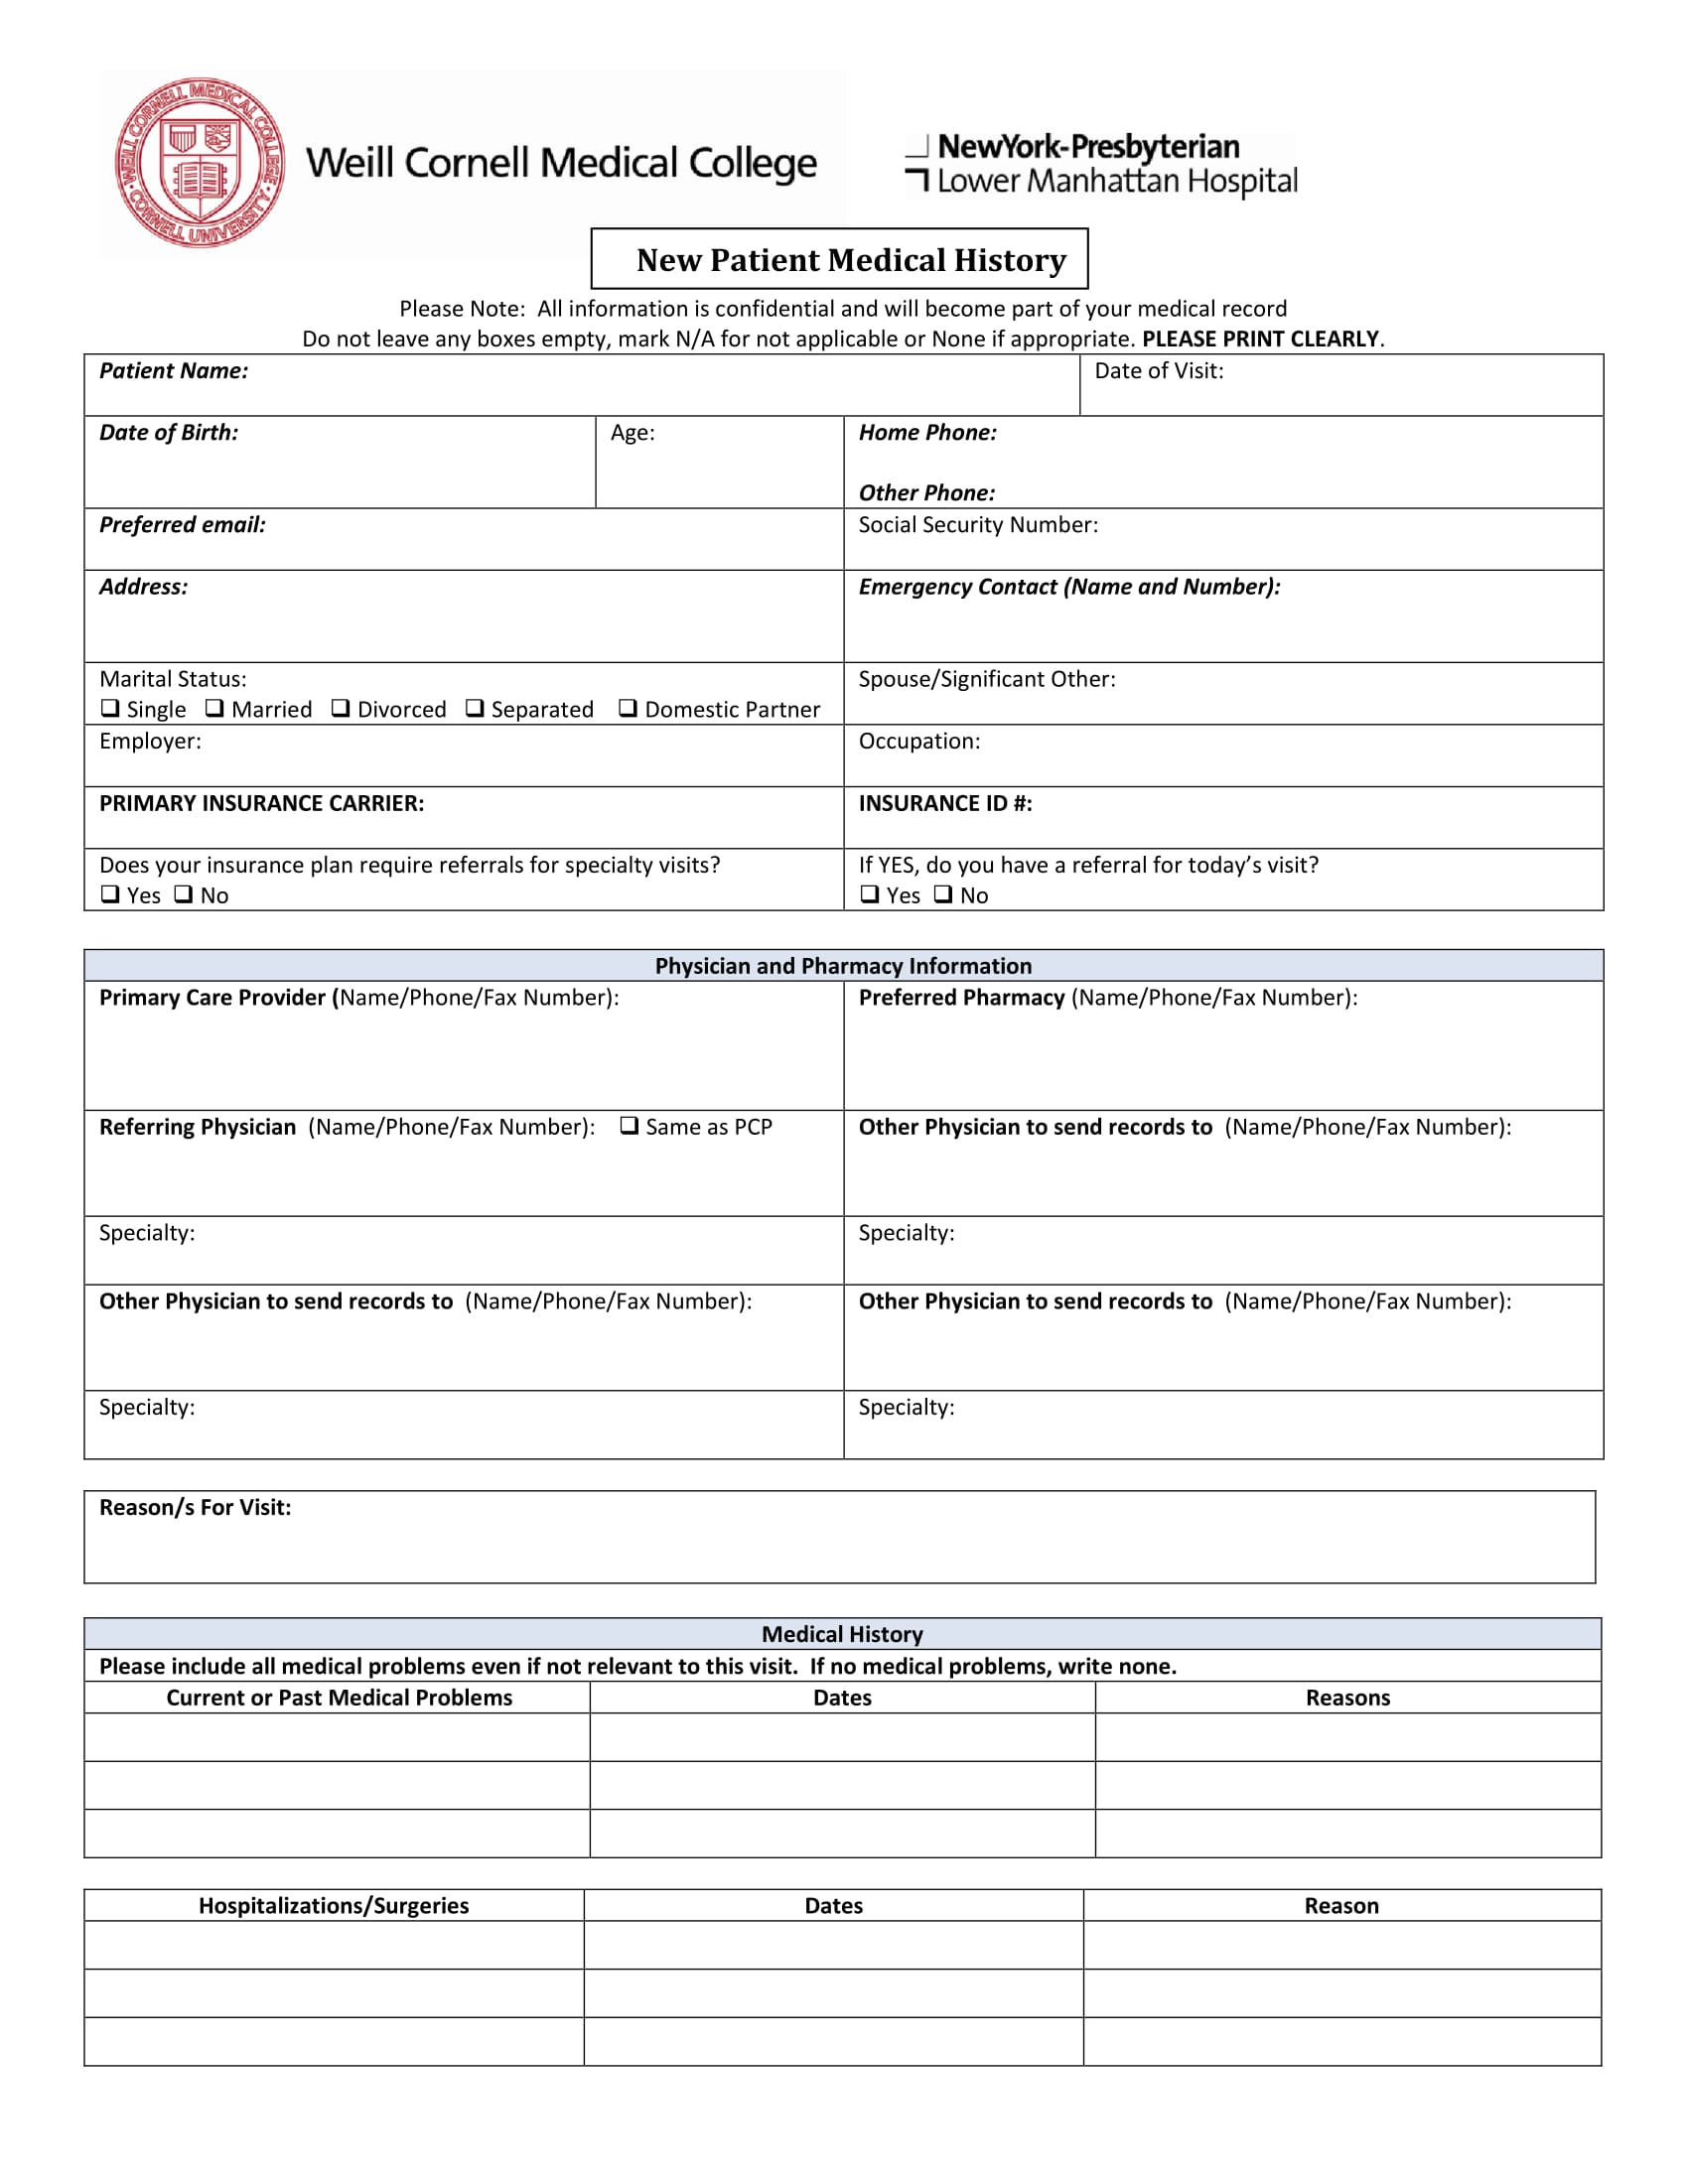 new patient medical history form